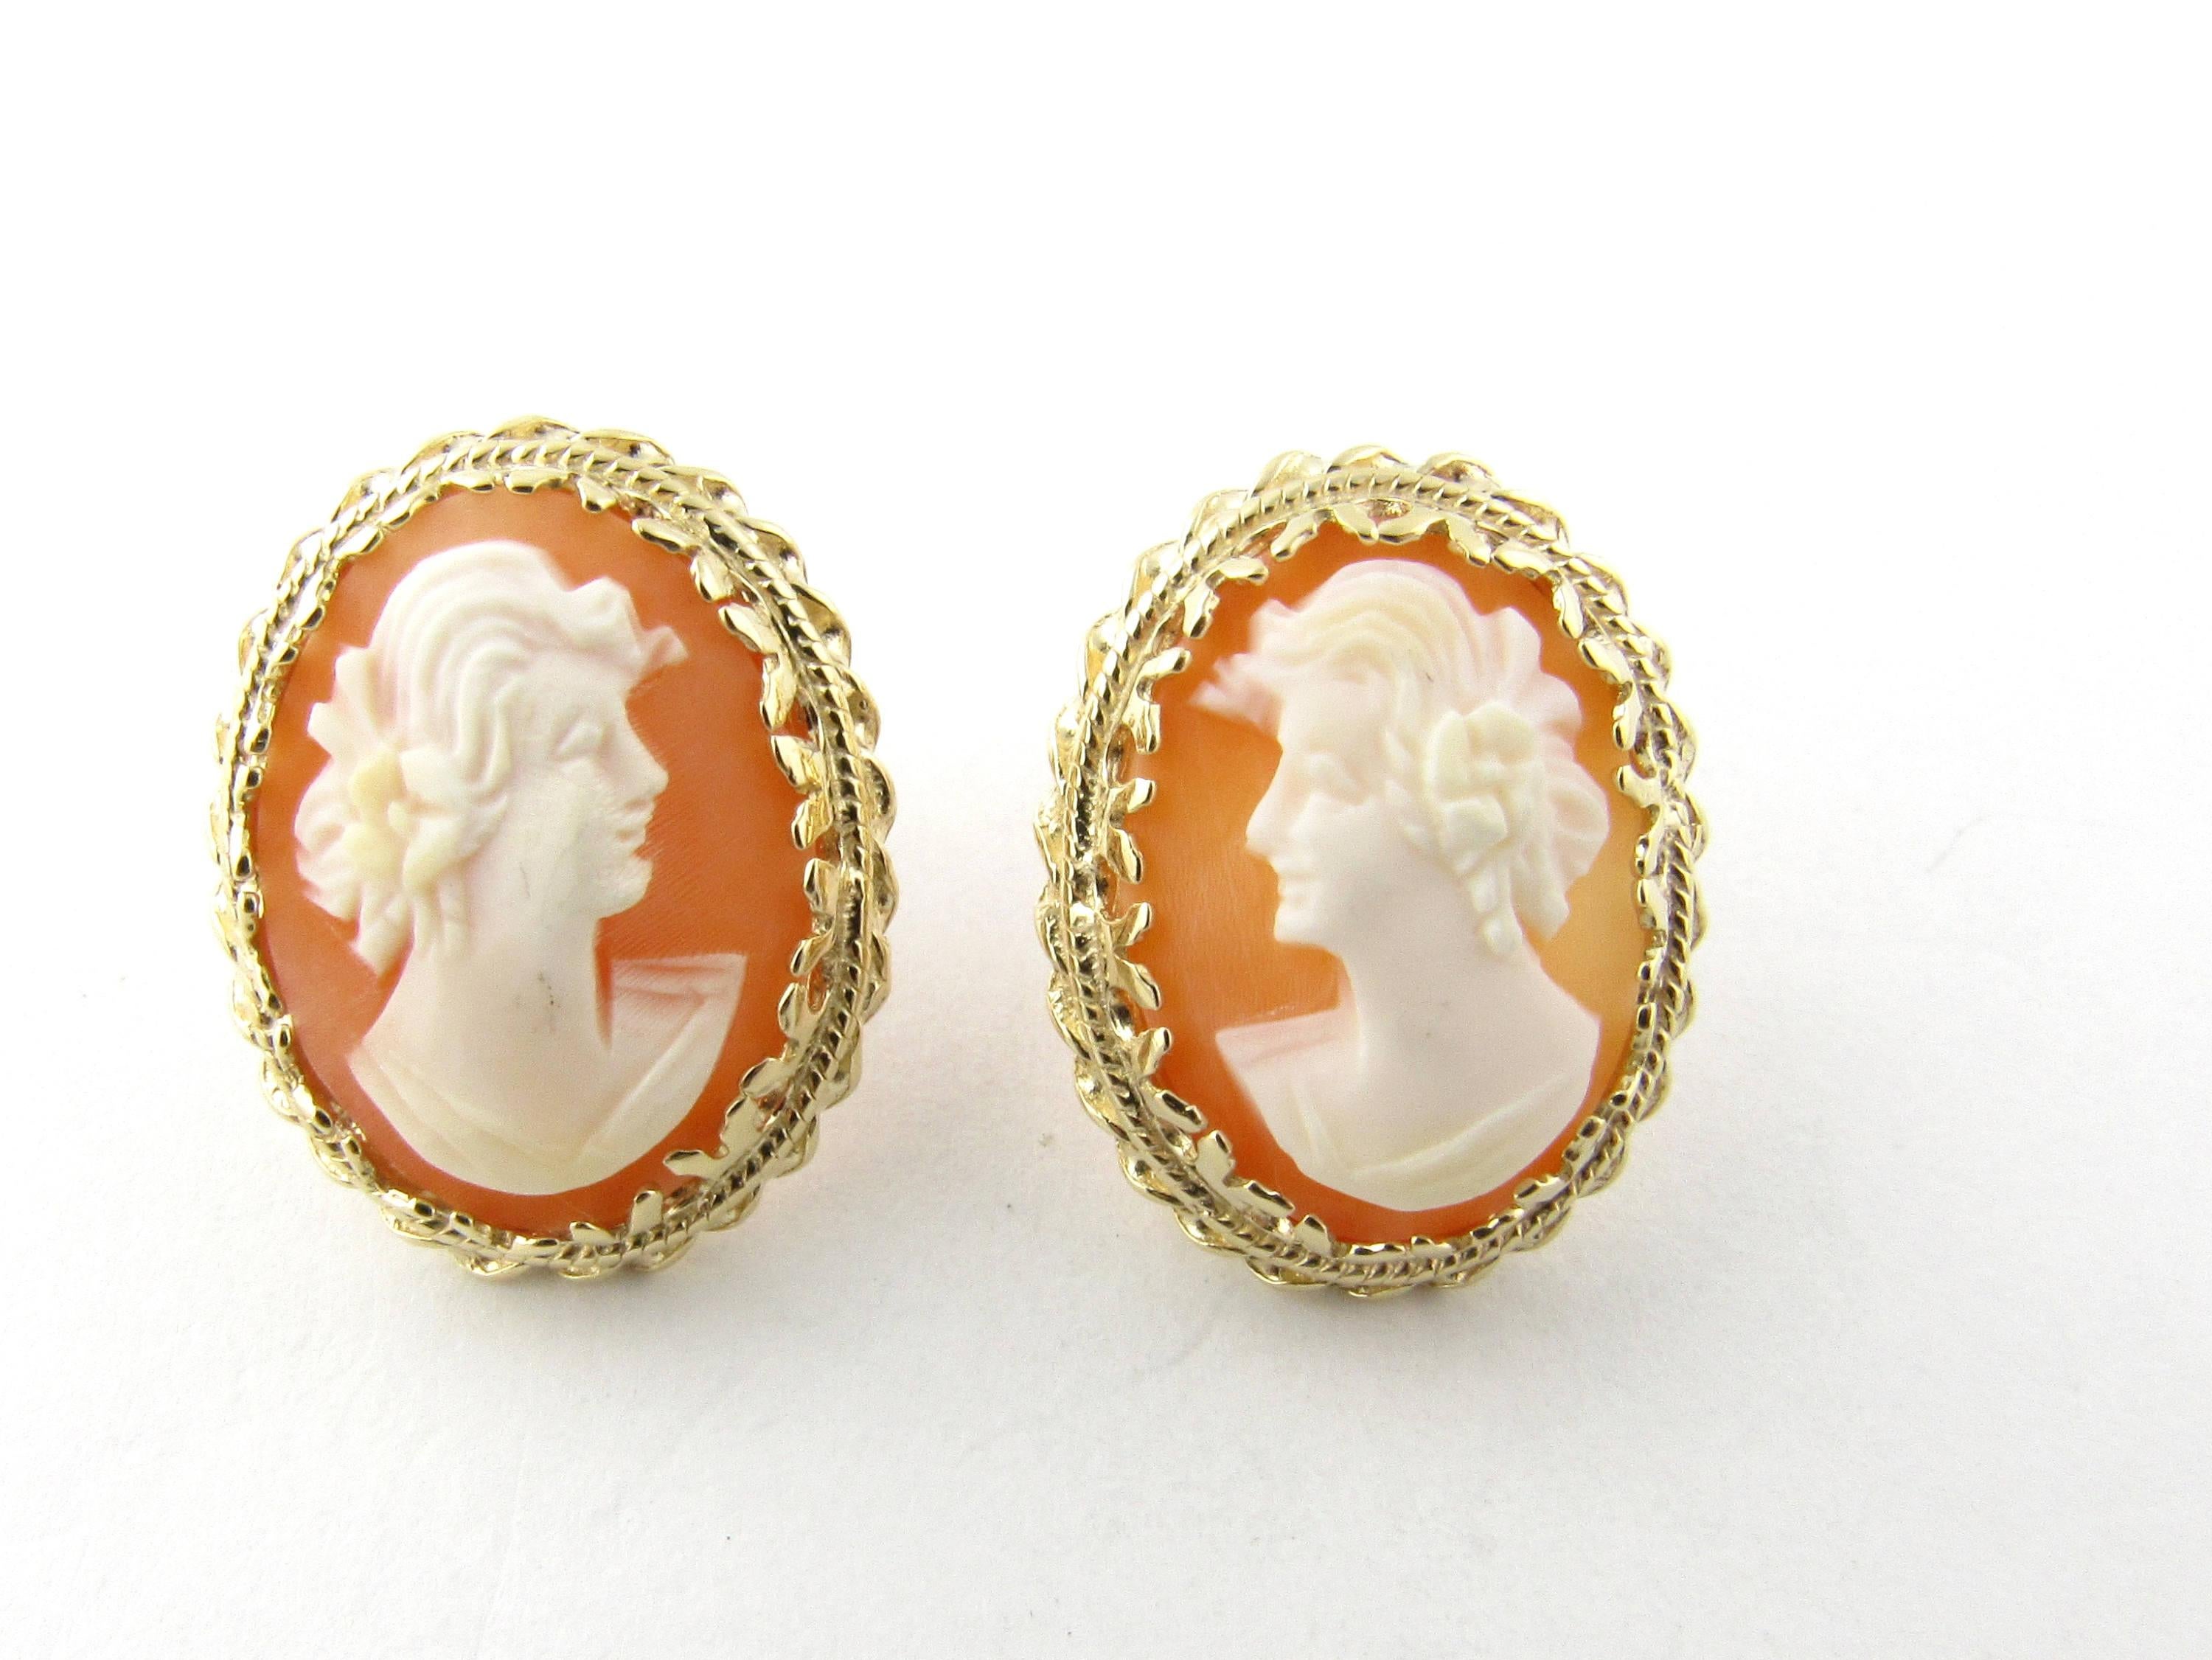 Vintage 14 Karat Yellow Gold Cameo Earrings-

These lovely cameo earrings each feature a lovely lady in profile. Framed in beautifully detailed 14K yellow gold. Push back closures.

Size:  21 mm x  16.5 mm

Weight:  5.4 dwt. /  8.4 gr.

Hallmark: